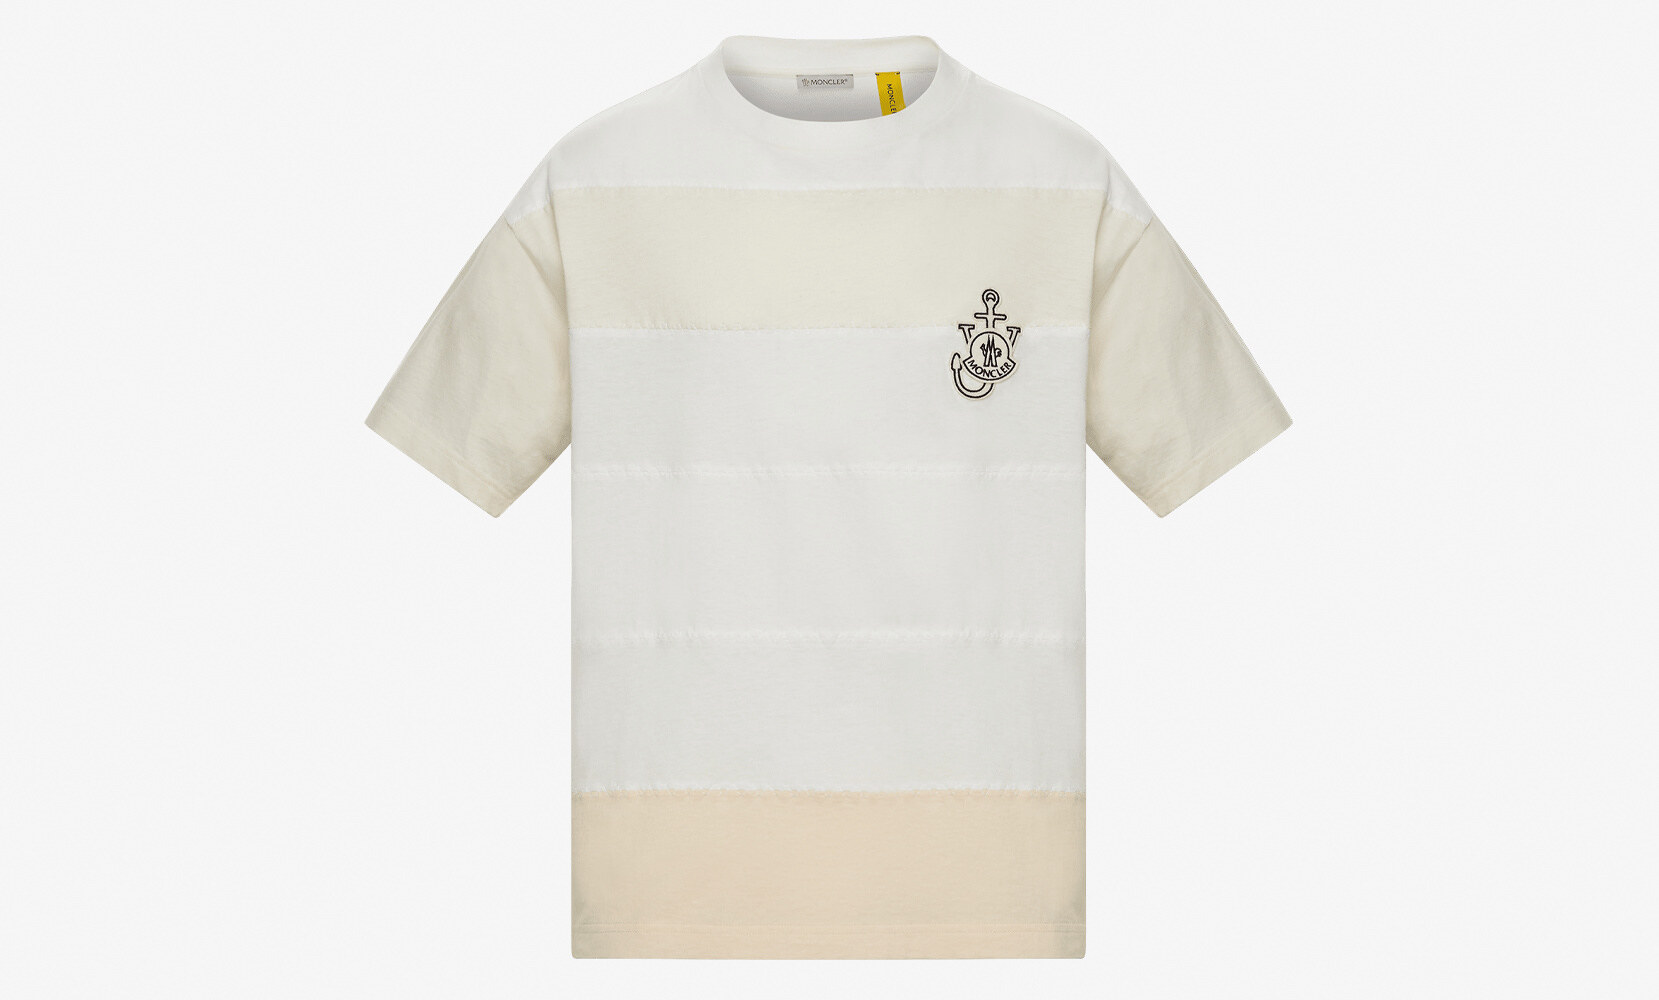 Moncler x JW Anderson capsule collection